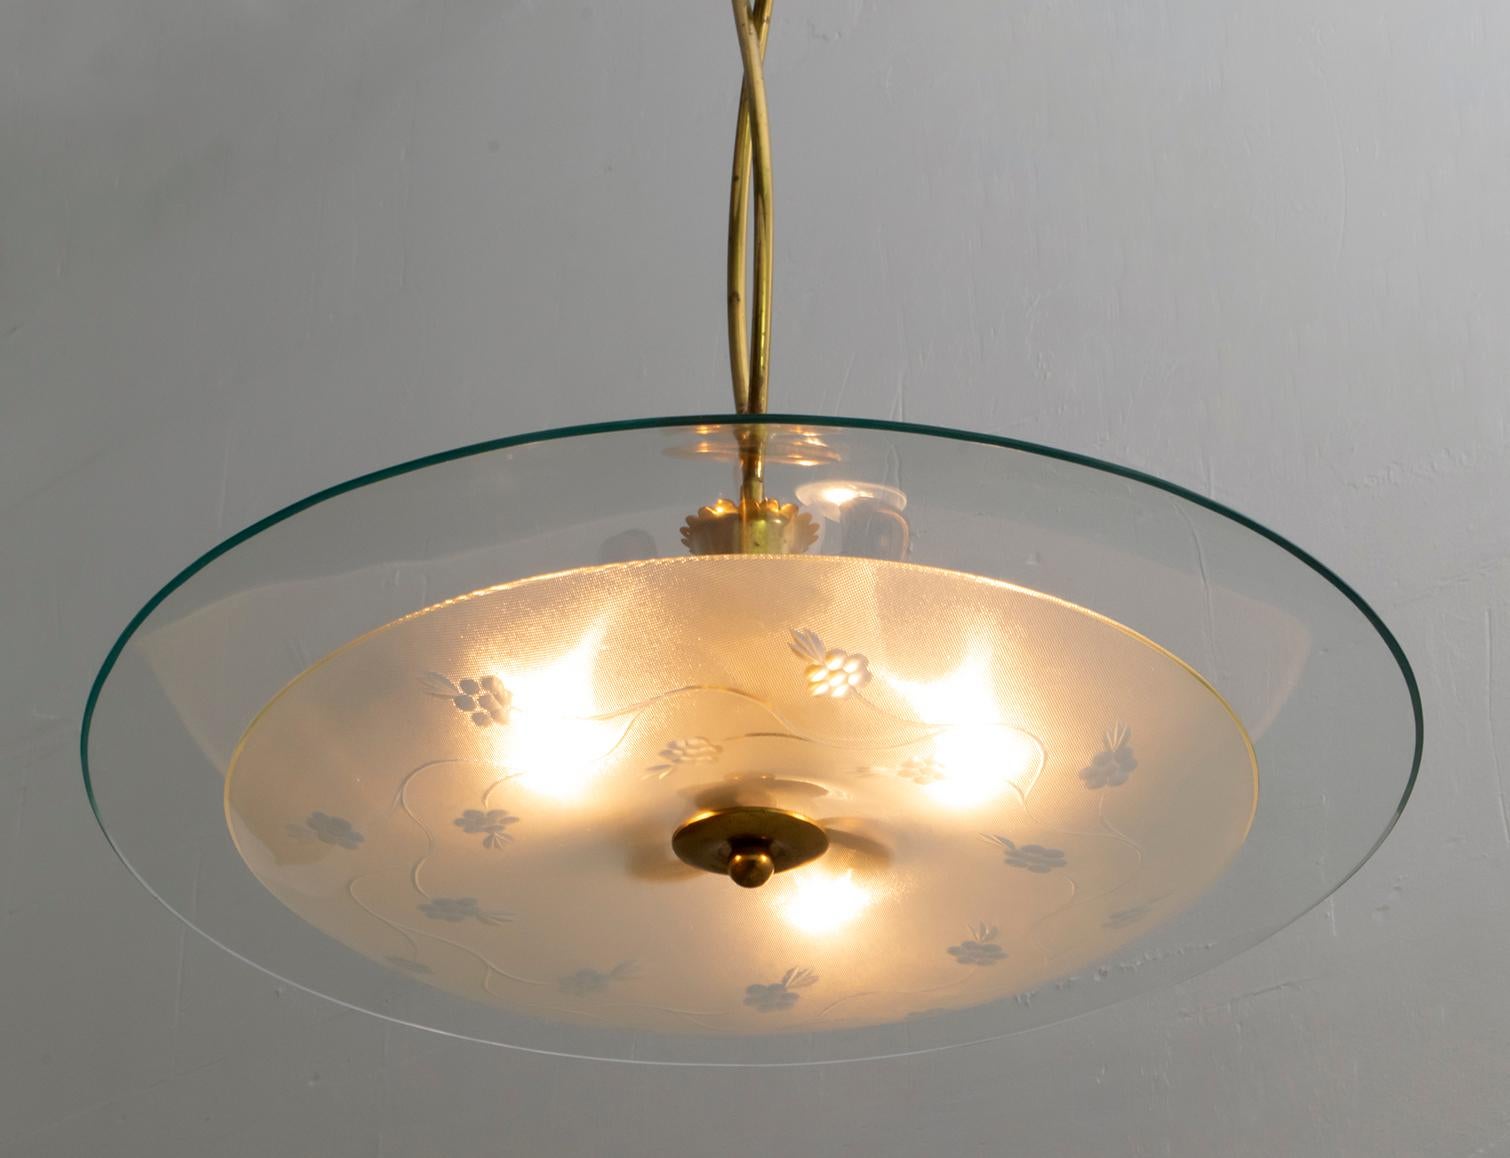 This midcentury glass and brass chandelier was designed by Pietro Chiesa for Fontana Arte in the 1940s.

The Italian Art Deco designer Pietro Chiesa was born in Milan in 1892 in a family of artists originally from Ticino, Switzerland. After his